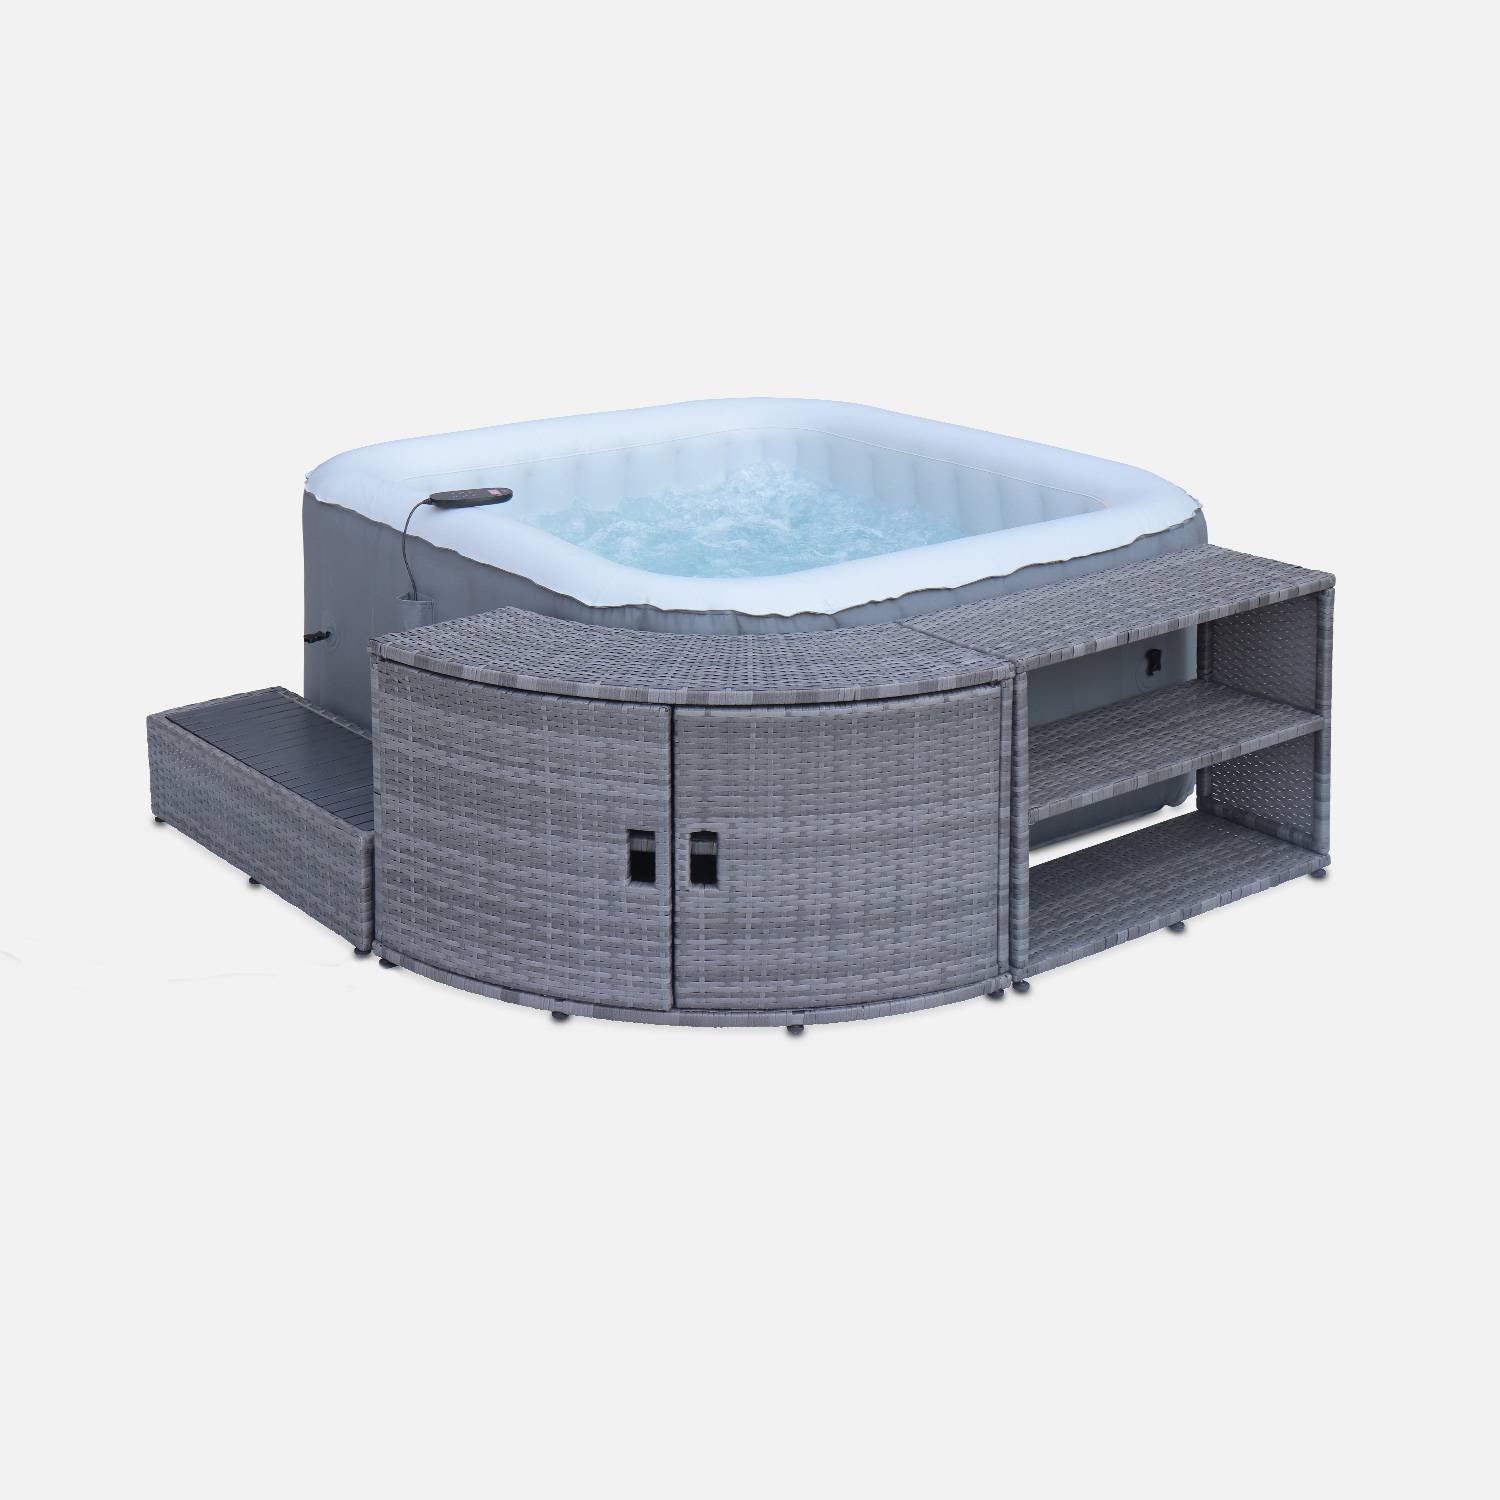 Grey polyrattan surround for square hot tub with cabinet, shelf and footstep Photo3